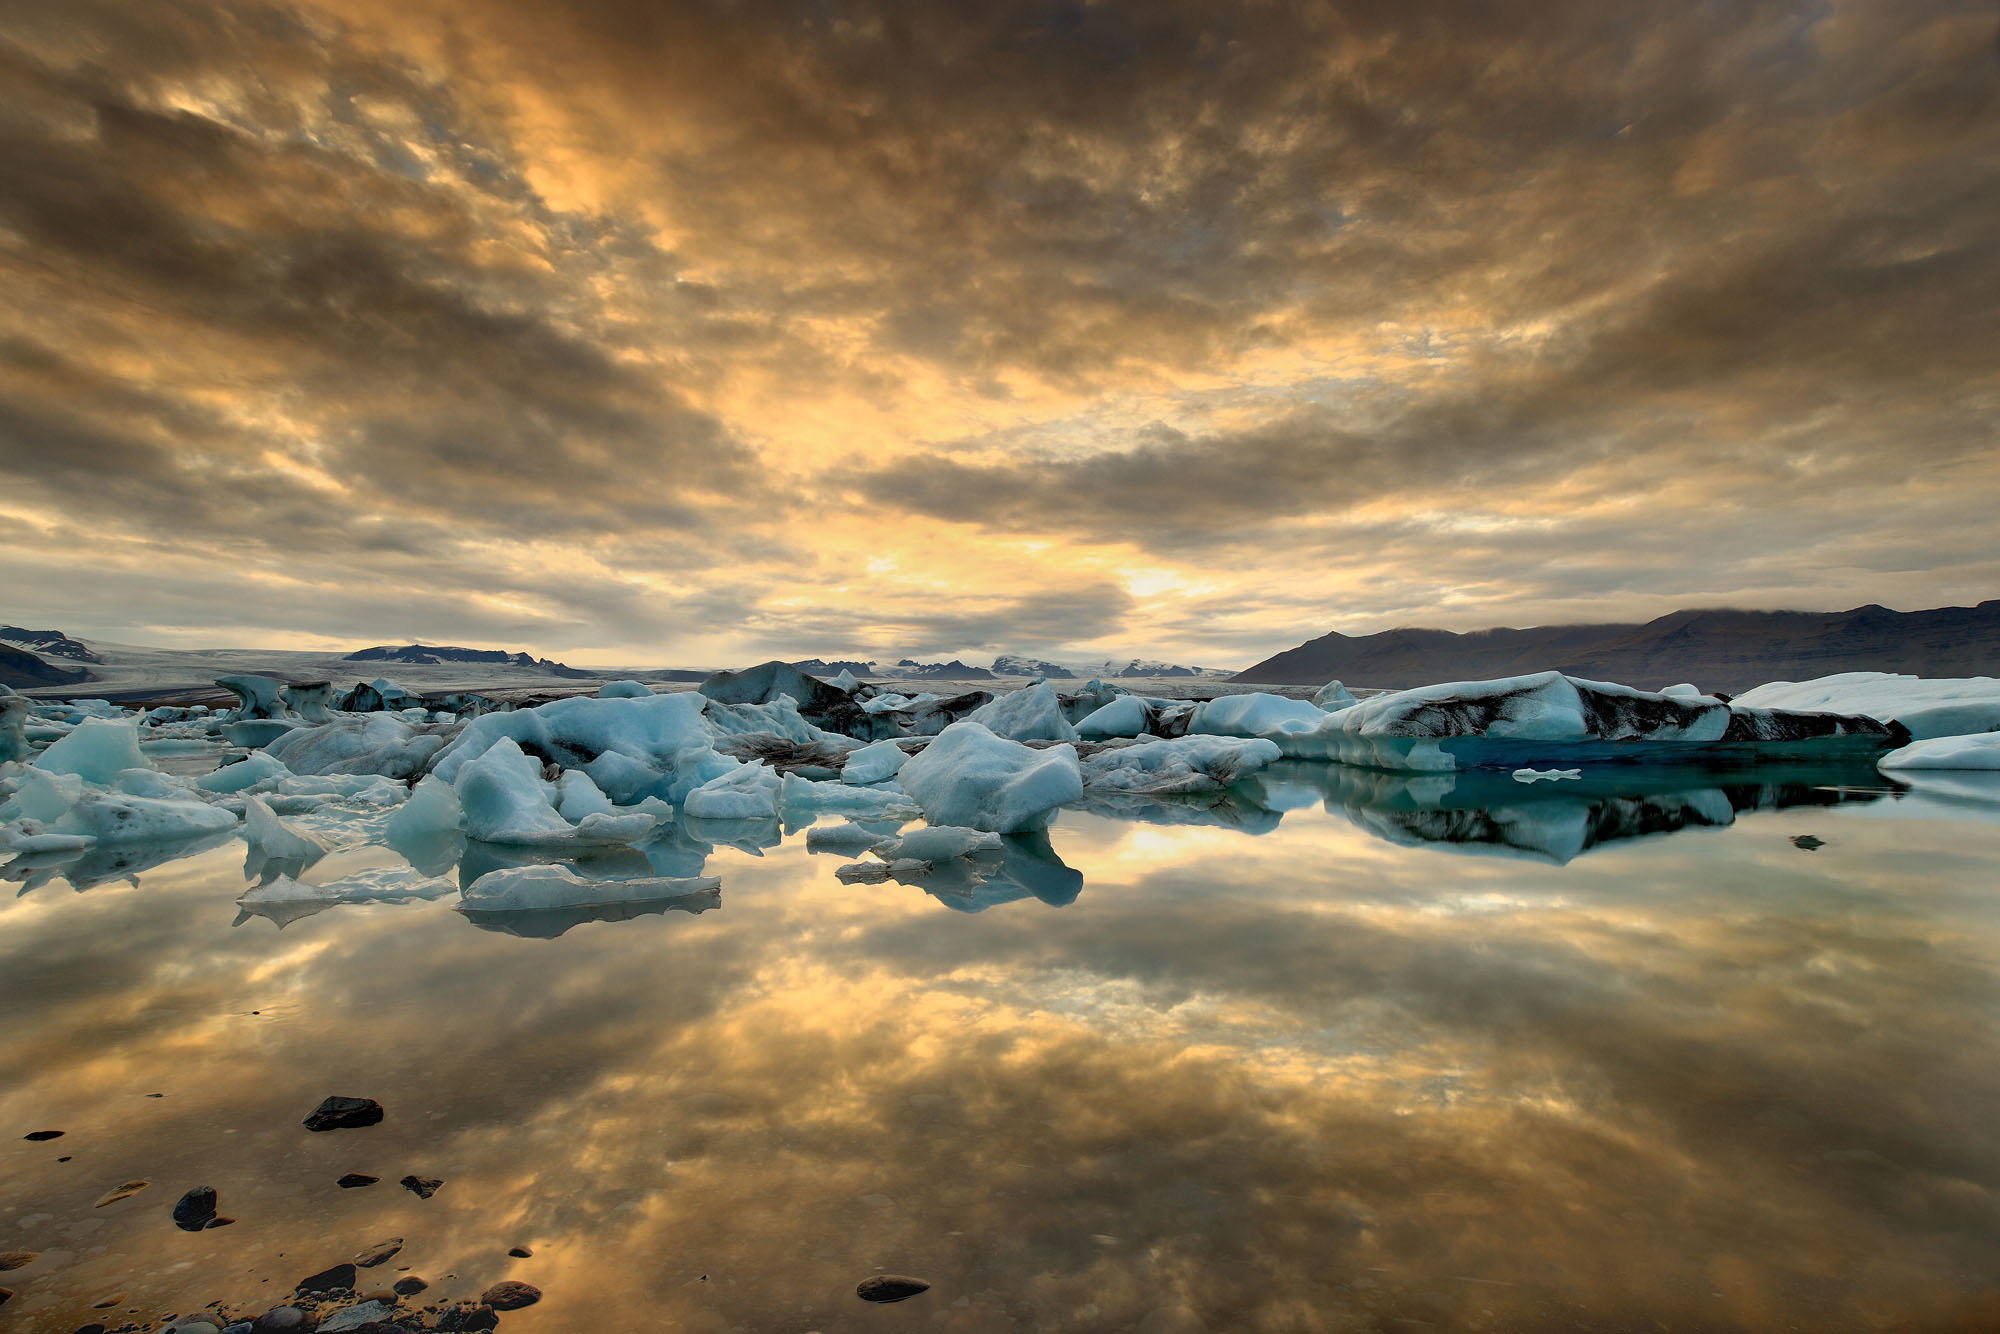 The Jökulsárlón proglacial lake lagoon full of icebergs at sunset with dramatic clouds reflecting in the lake